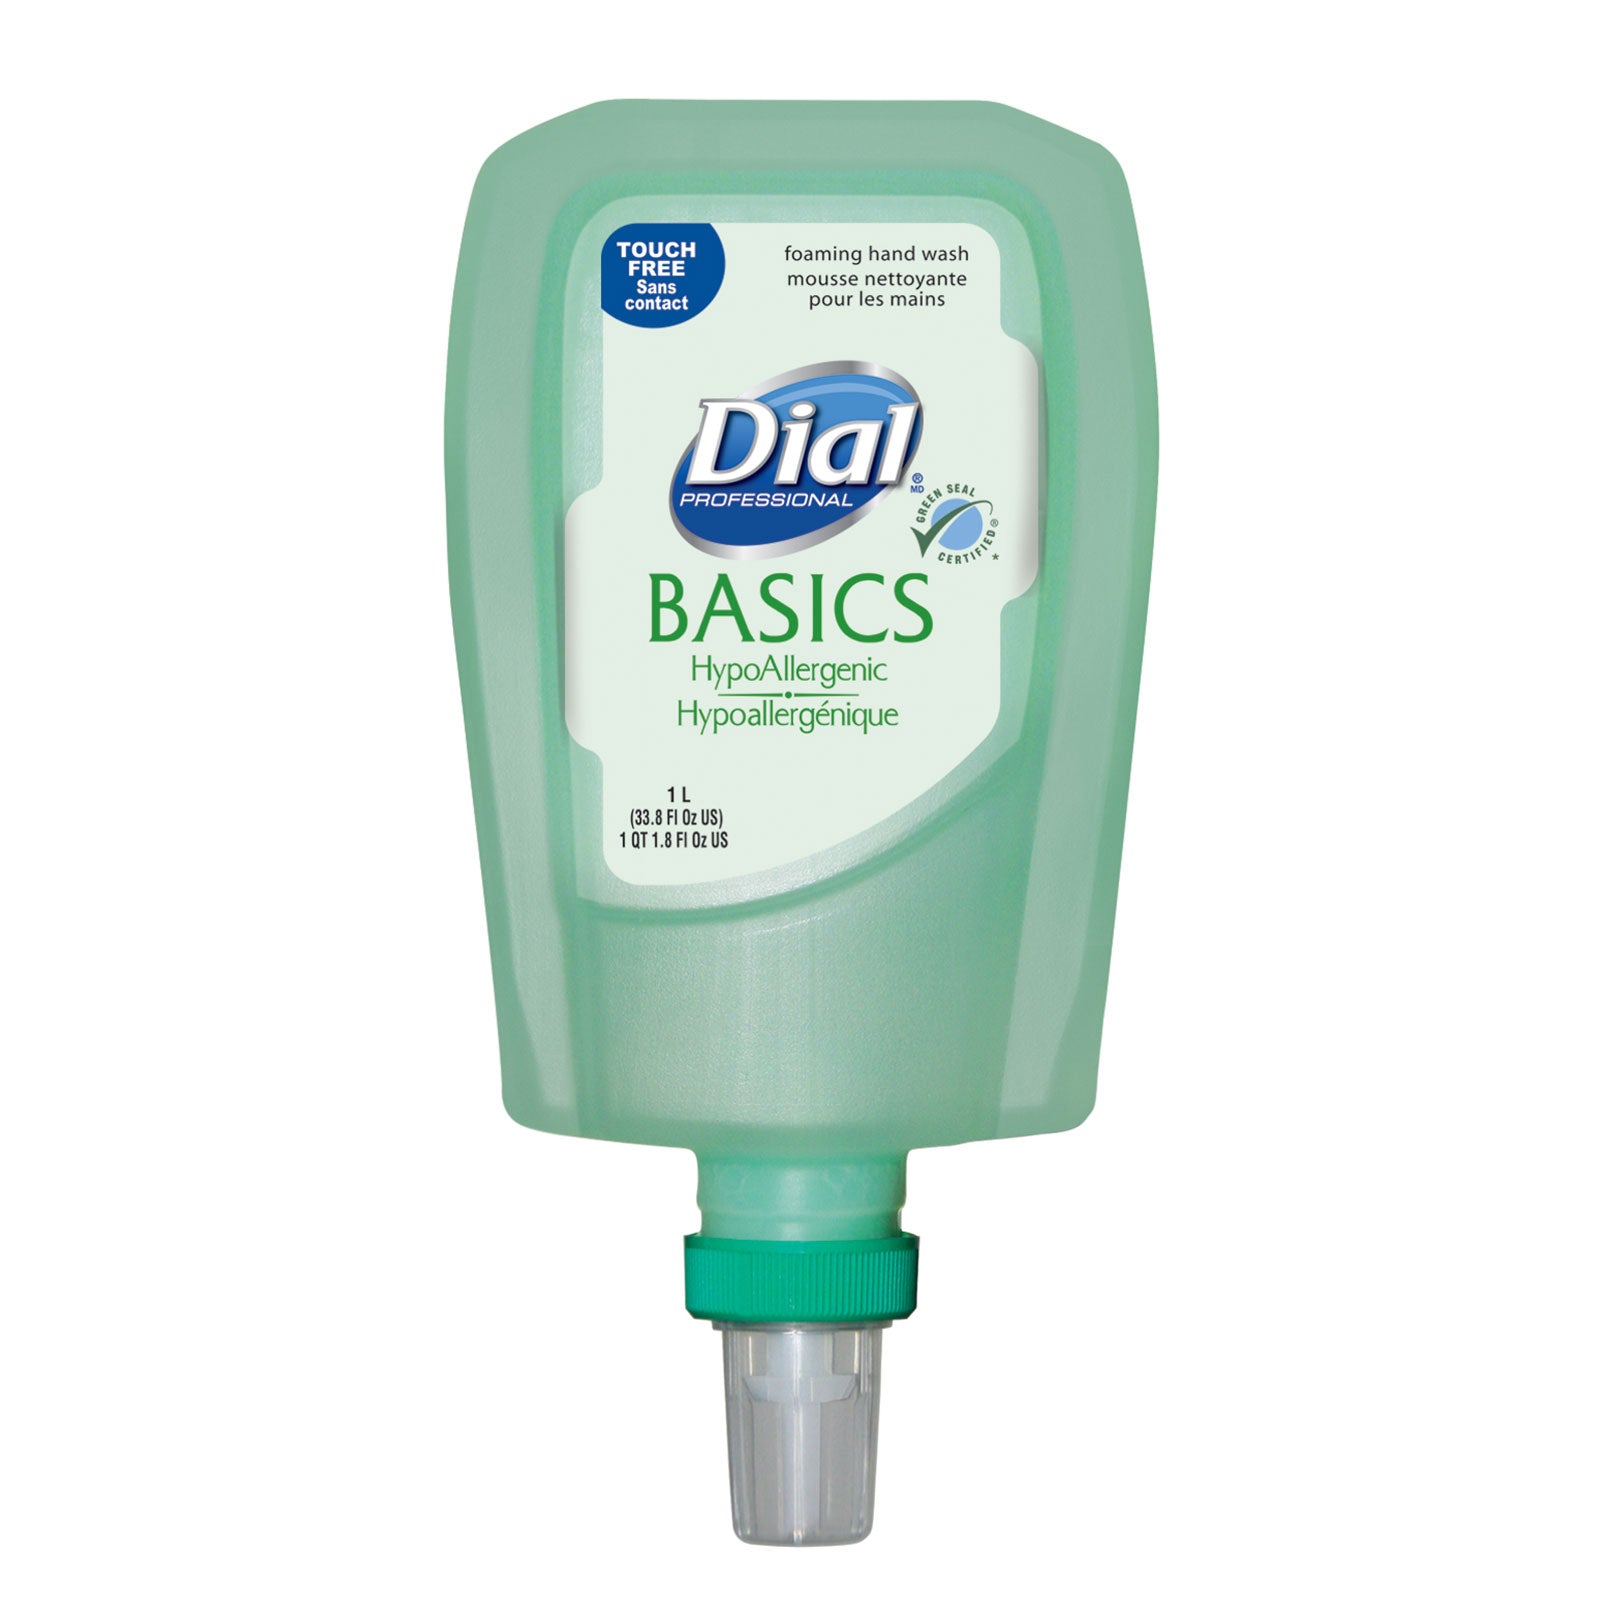 Dial® Basics Hypoallergenic Foaming Hand Wash, FIT® Universal Touch-Free - 1L Dispenser Refill Case of 3